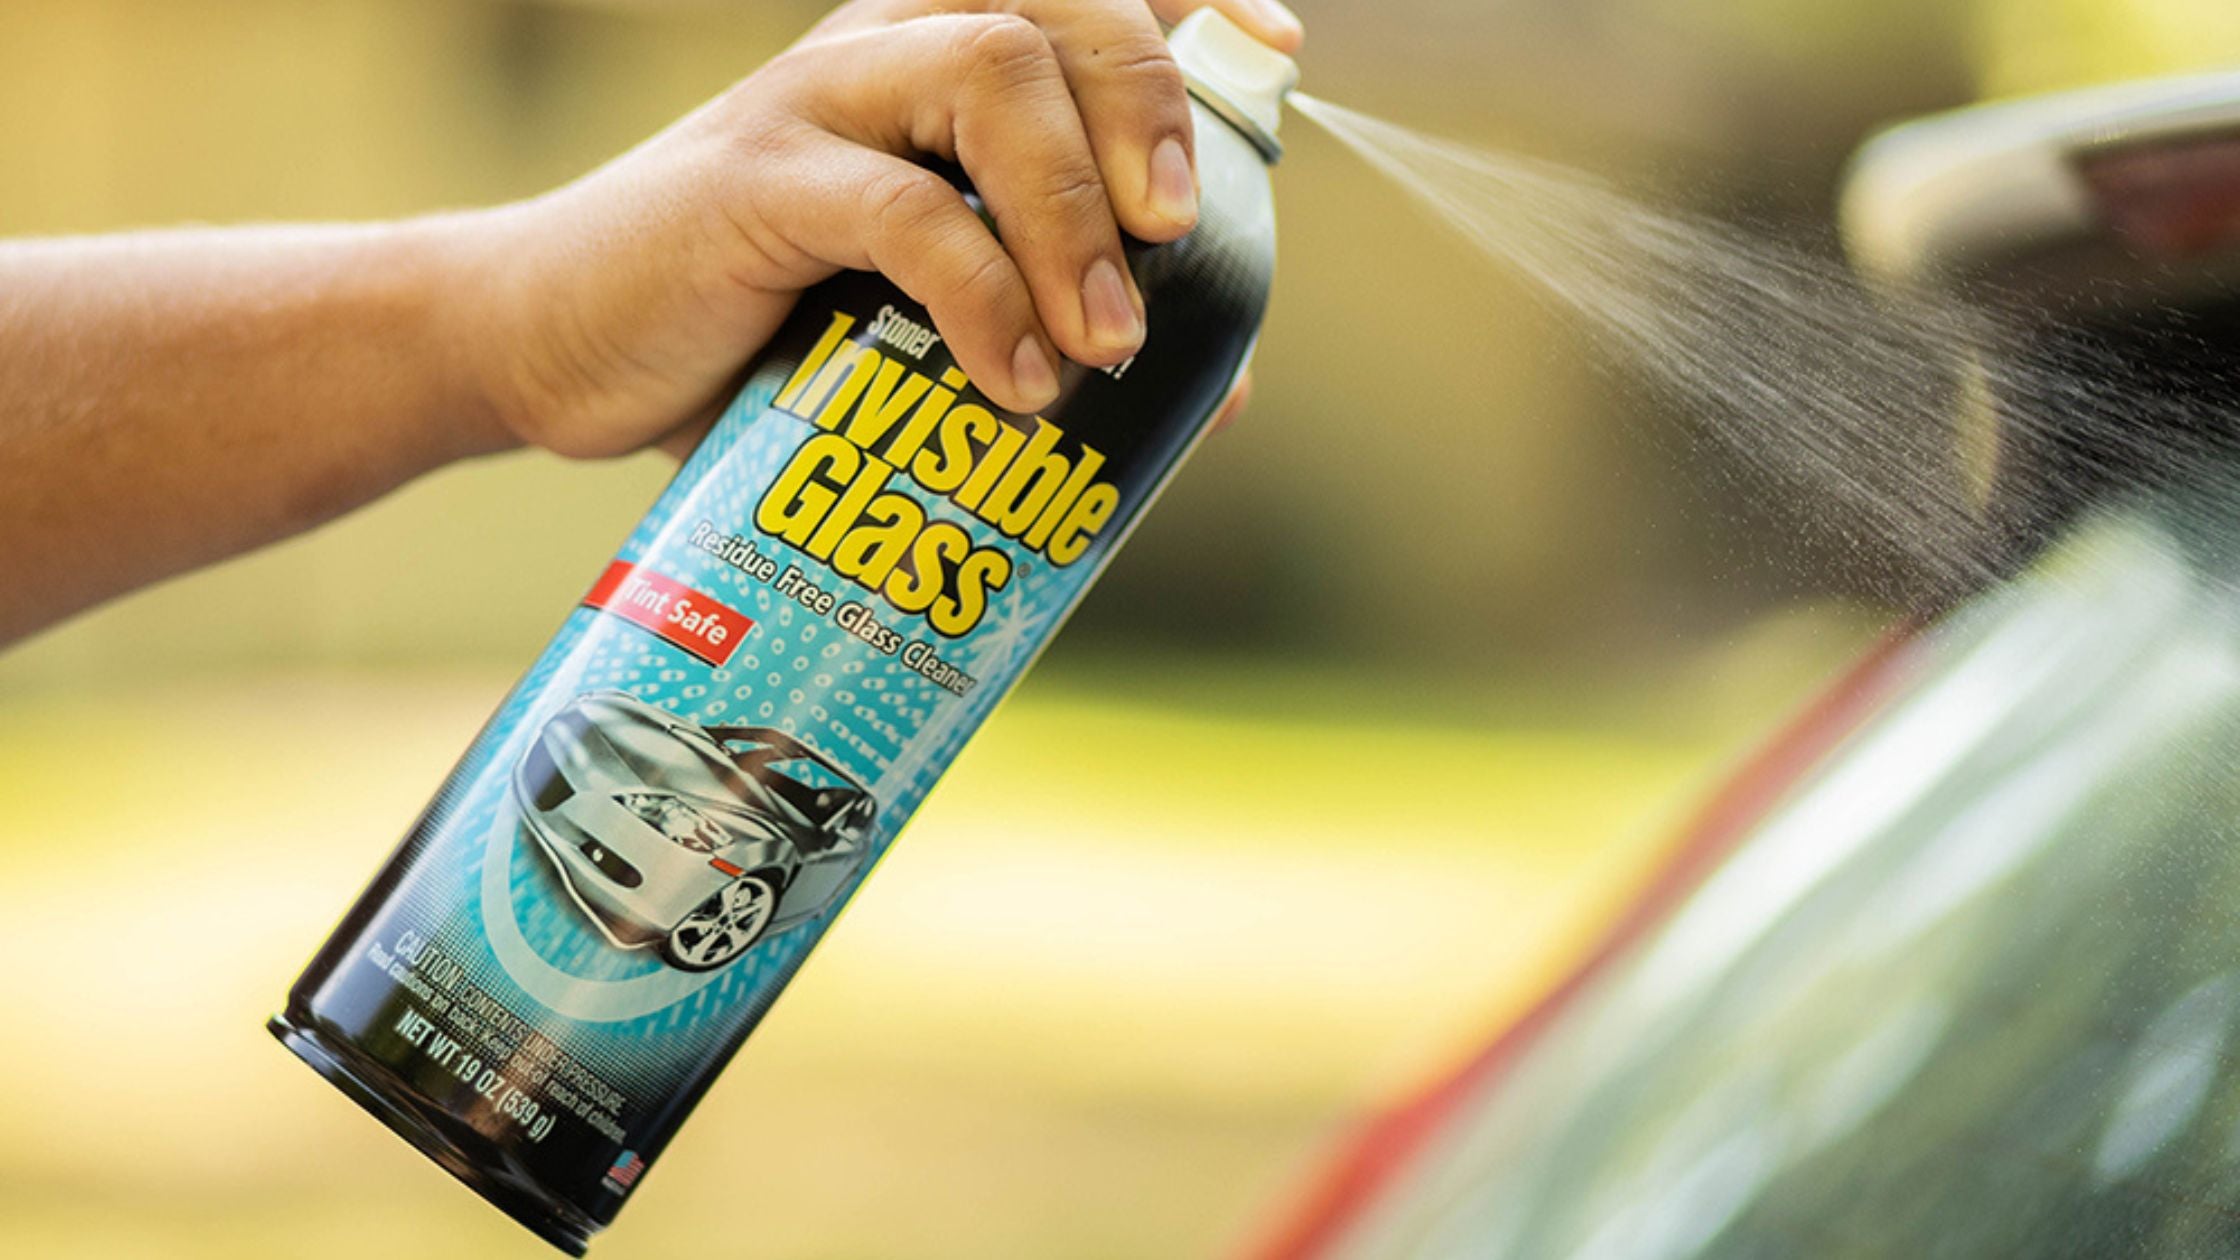 Stoner Car Care - Glass Stripper is an excellent surface preparation to  remove contamination before applying a rain repellent or semi-permanent  coating. Have you tried Glass Stripper yet? #glassstripper #glasstreatment  #windsheildtreatment #carcare #